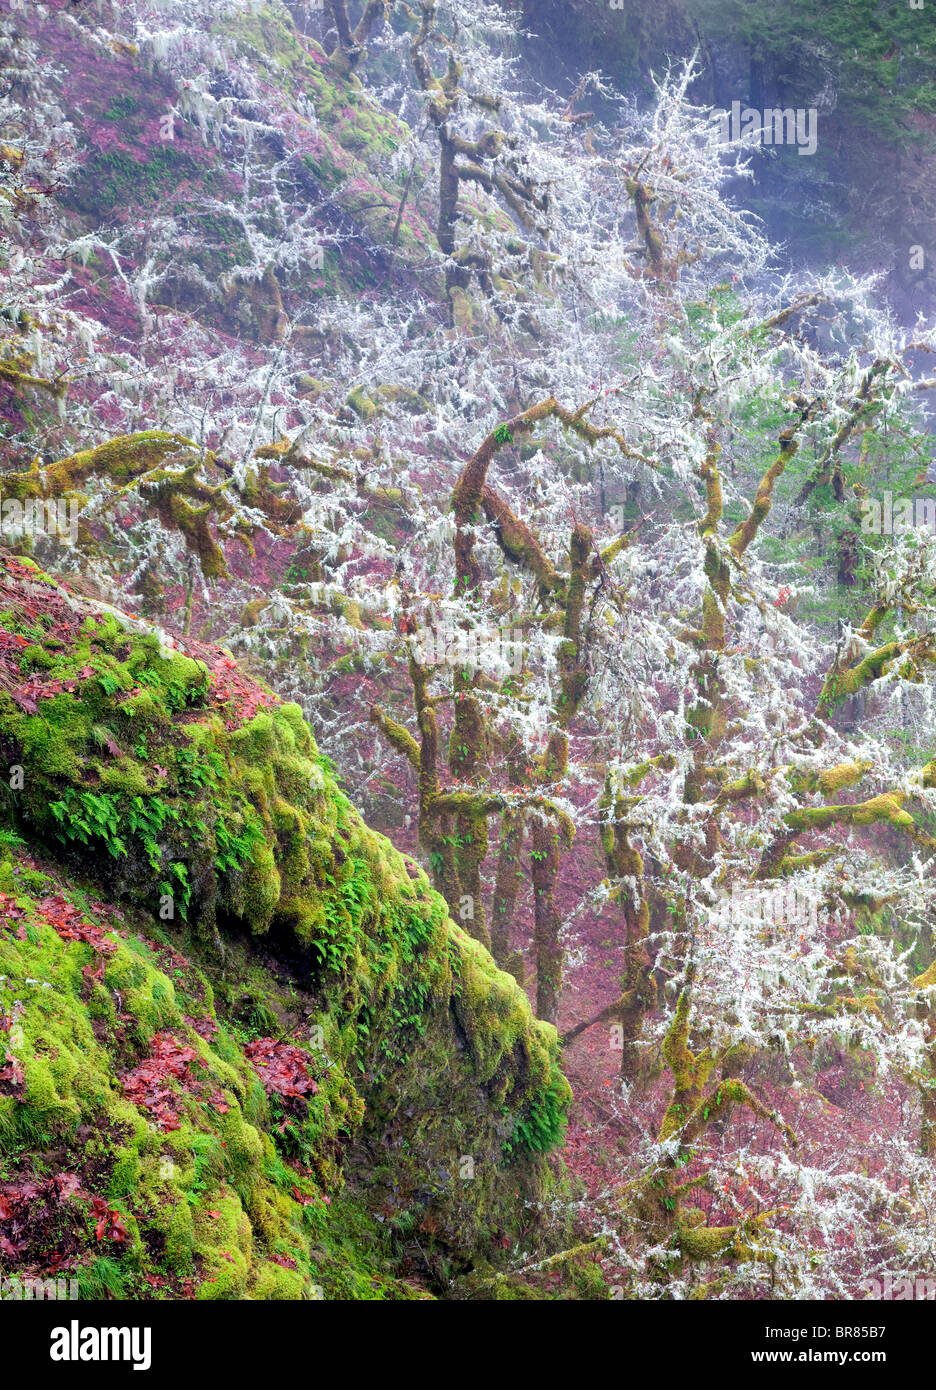 Moss and fog in forest. Eagle Creek basin. Columbia River Gorge National Scenic Area, Oregon Stock Photo